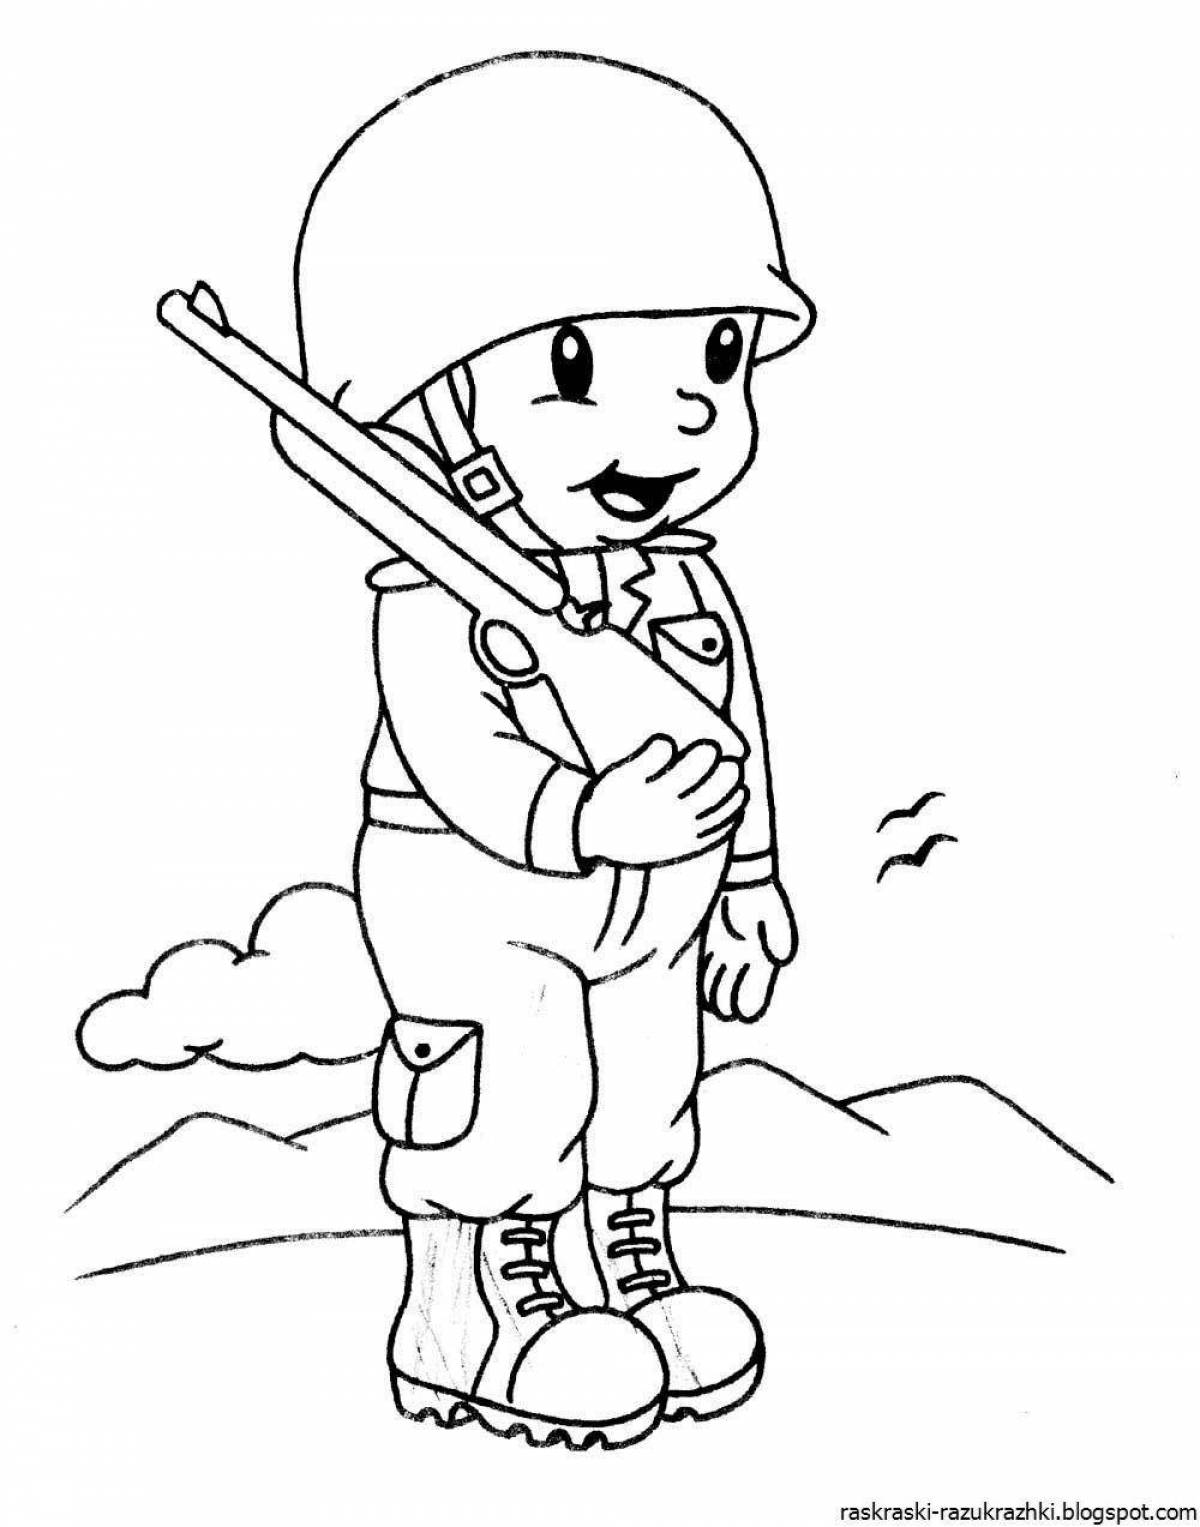 Intricate military profession coloring book